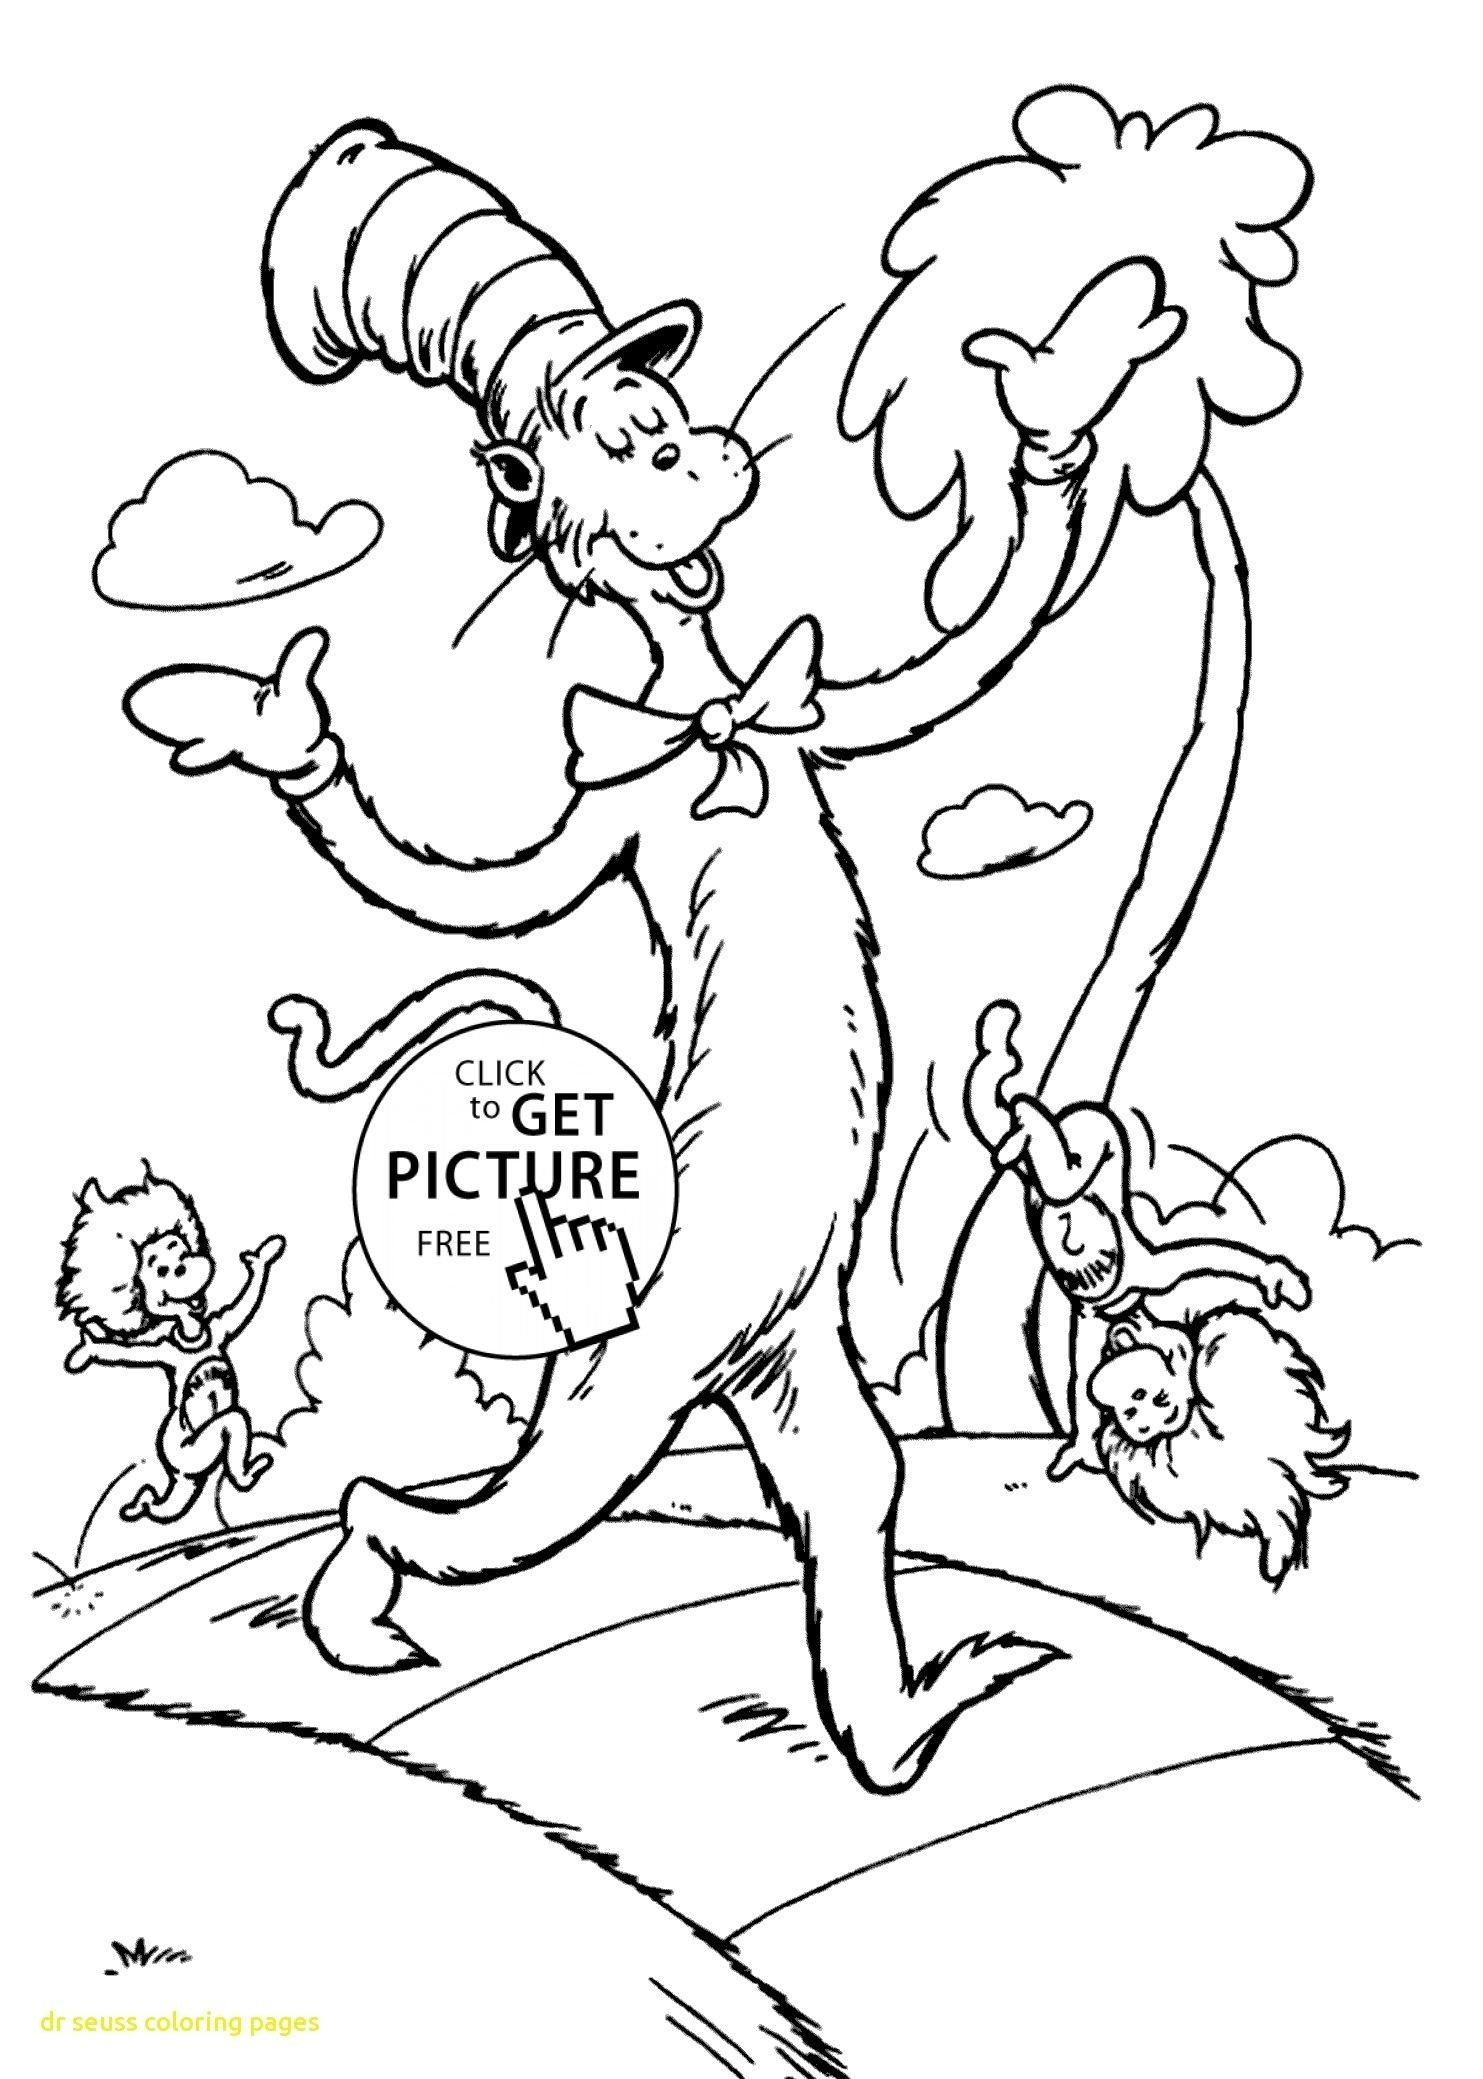 Dr Seuss Free Coloring Pages New Astonishing Dr Seuss Coloring Pour - Free Printable Dr Seuss Coloring Pages